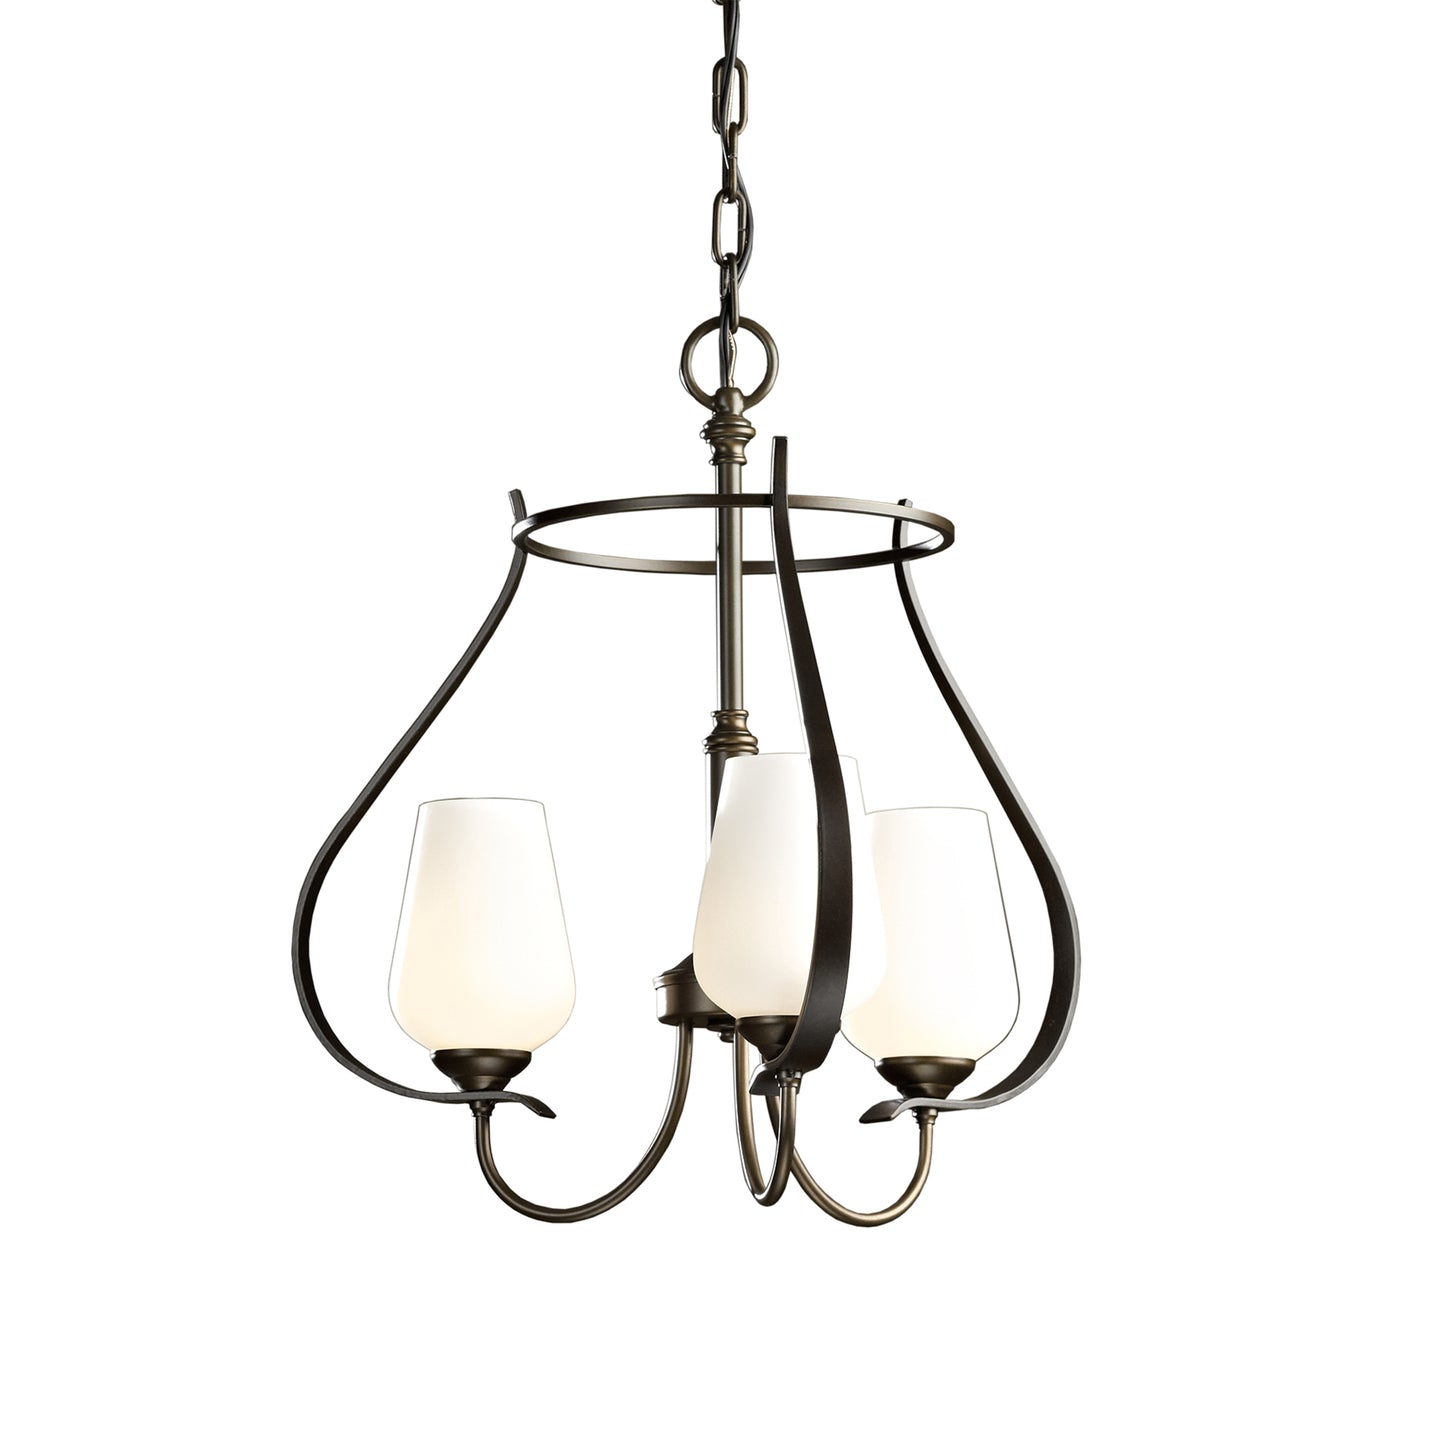 The Flora Chandelier by Hubbardton Forge features a white glass shade and is crafted using environmentally safe metal forging techniques.